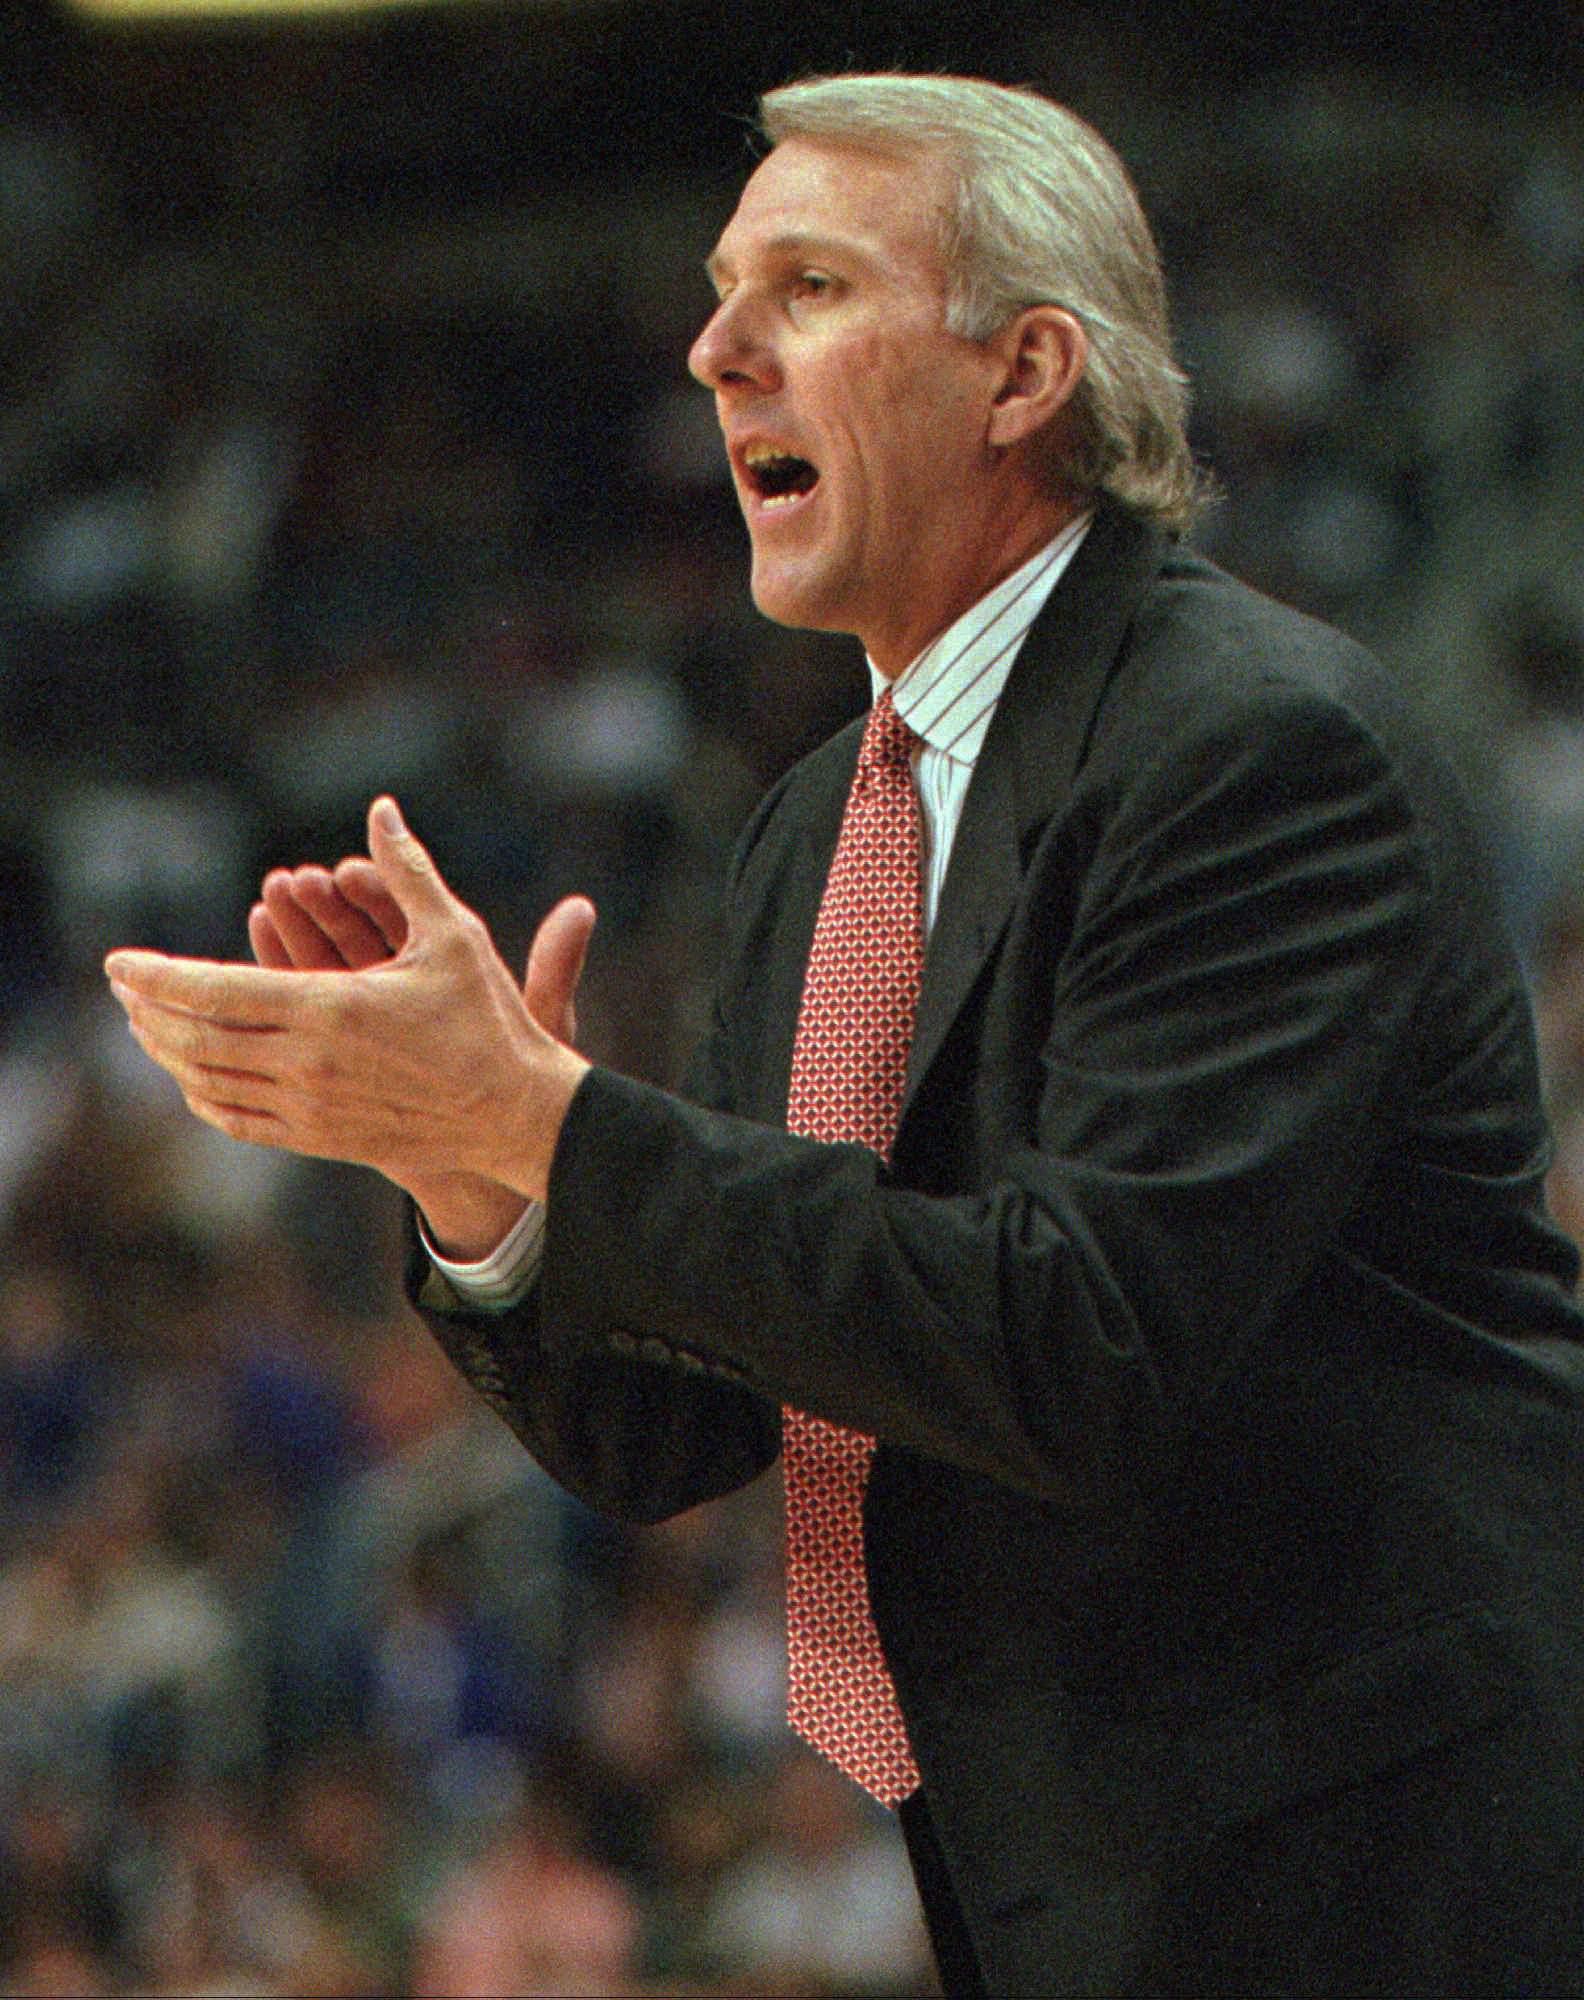 Gregg Popovich shouting from the sidelines.